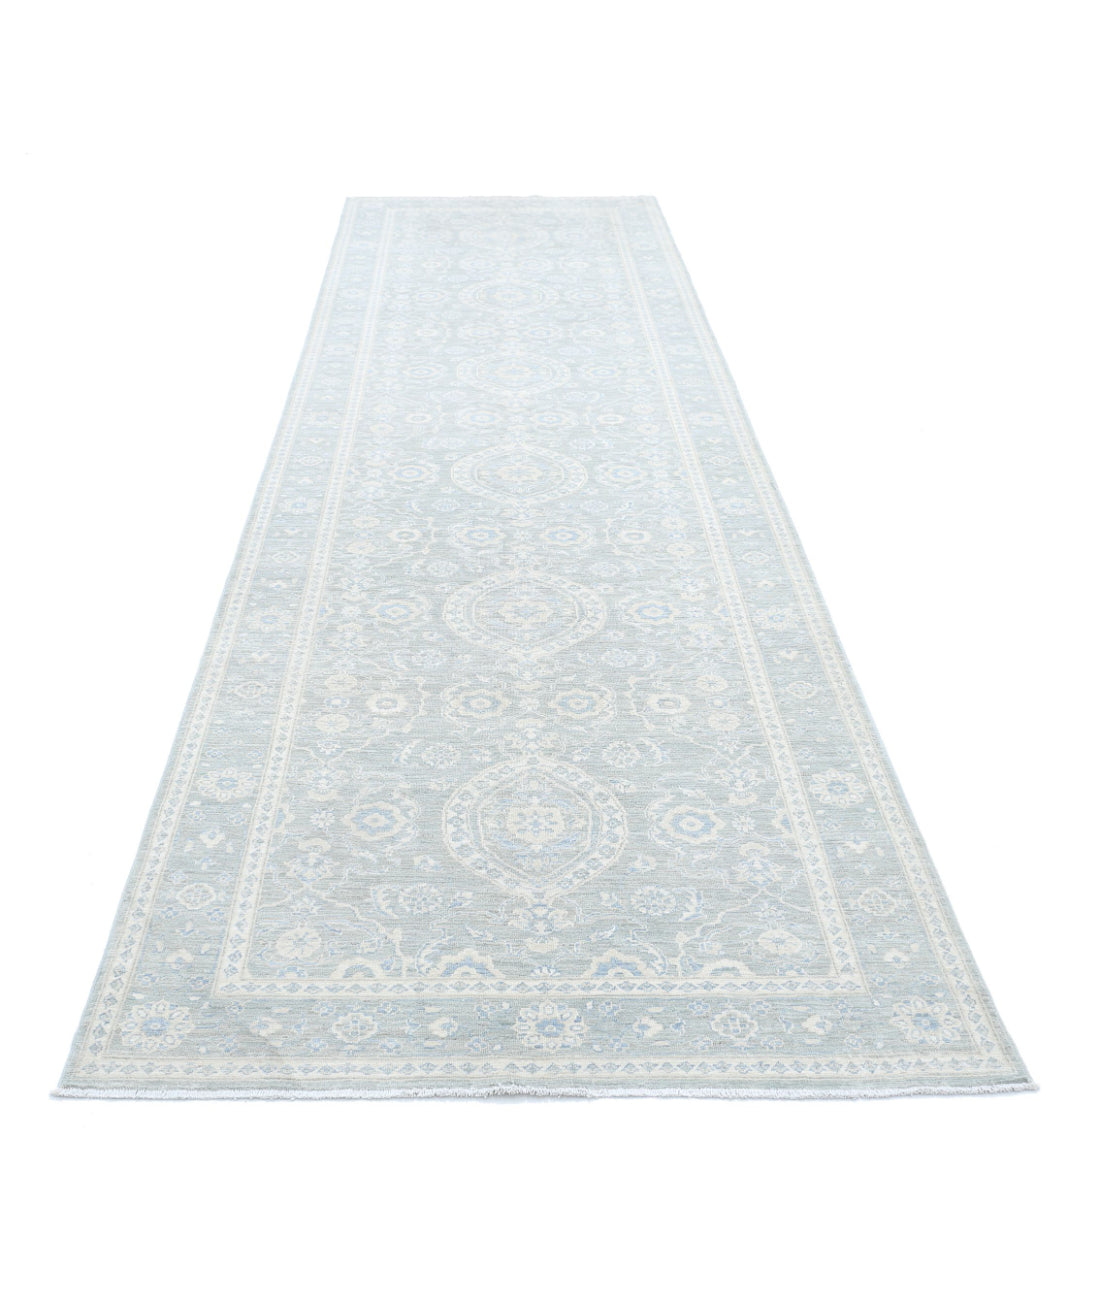 Serenity 4'0'' X 14'3'' Hand-Knotted Wool Rug 4'0'' x 14'3'' (120 X 428) / Grey / Blue